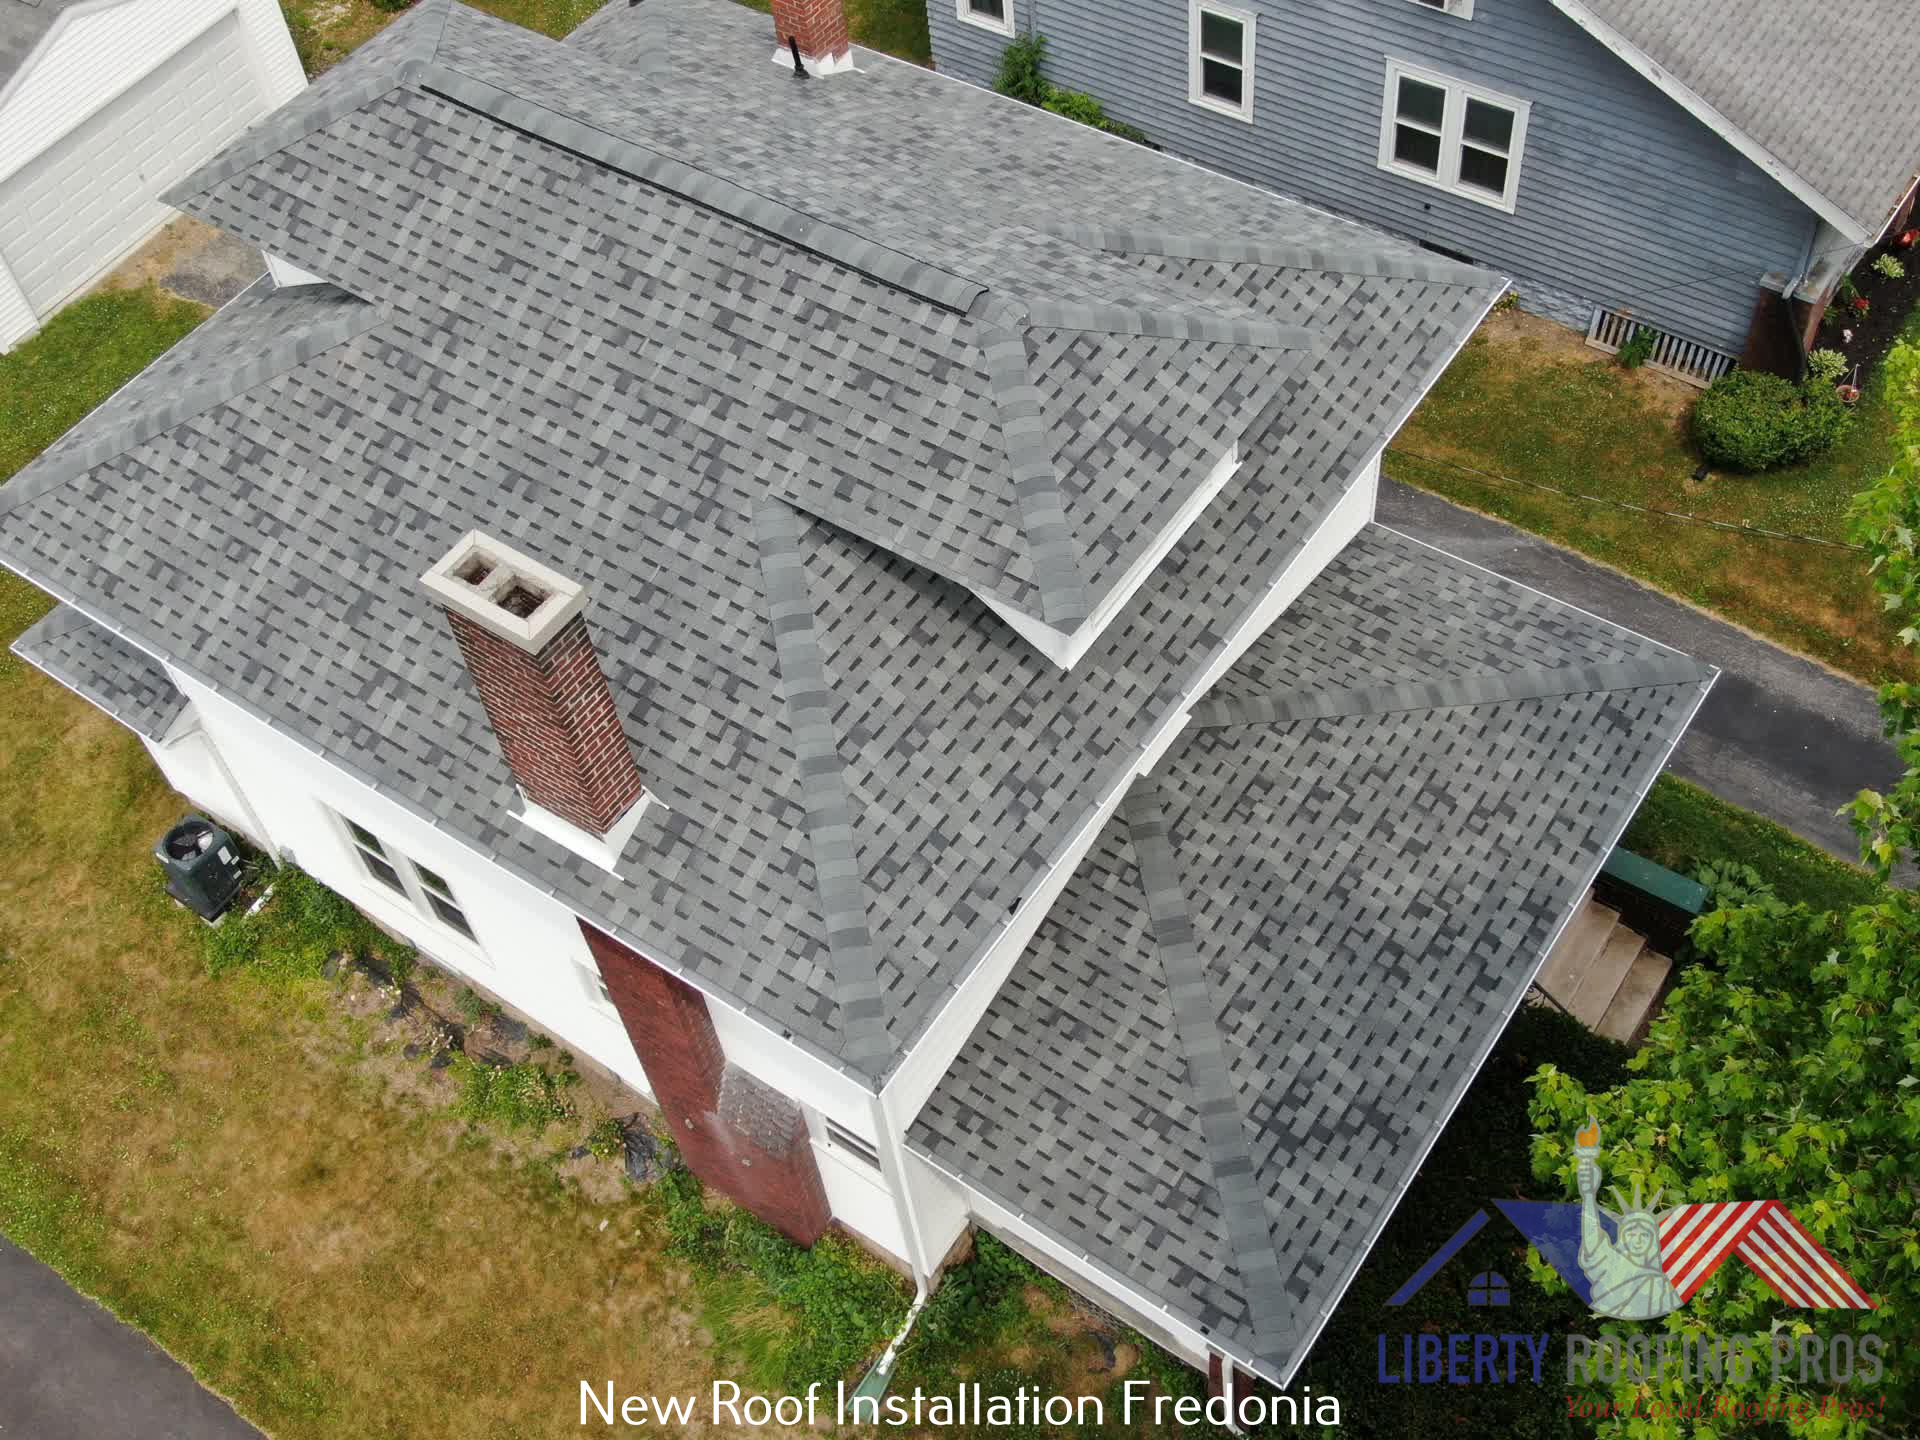 Liberty Roofing Pros LLC Simplifies Roofing Repairs with Hassle-Free Insurance Claims Process